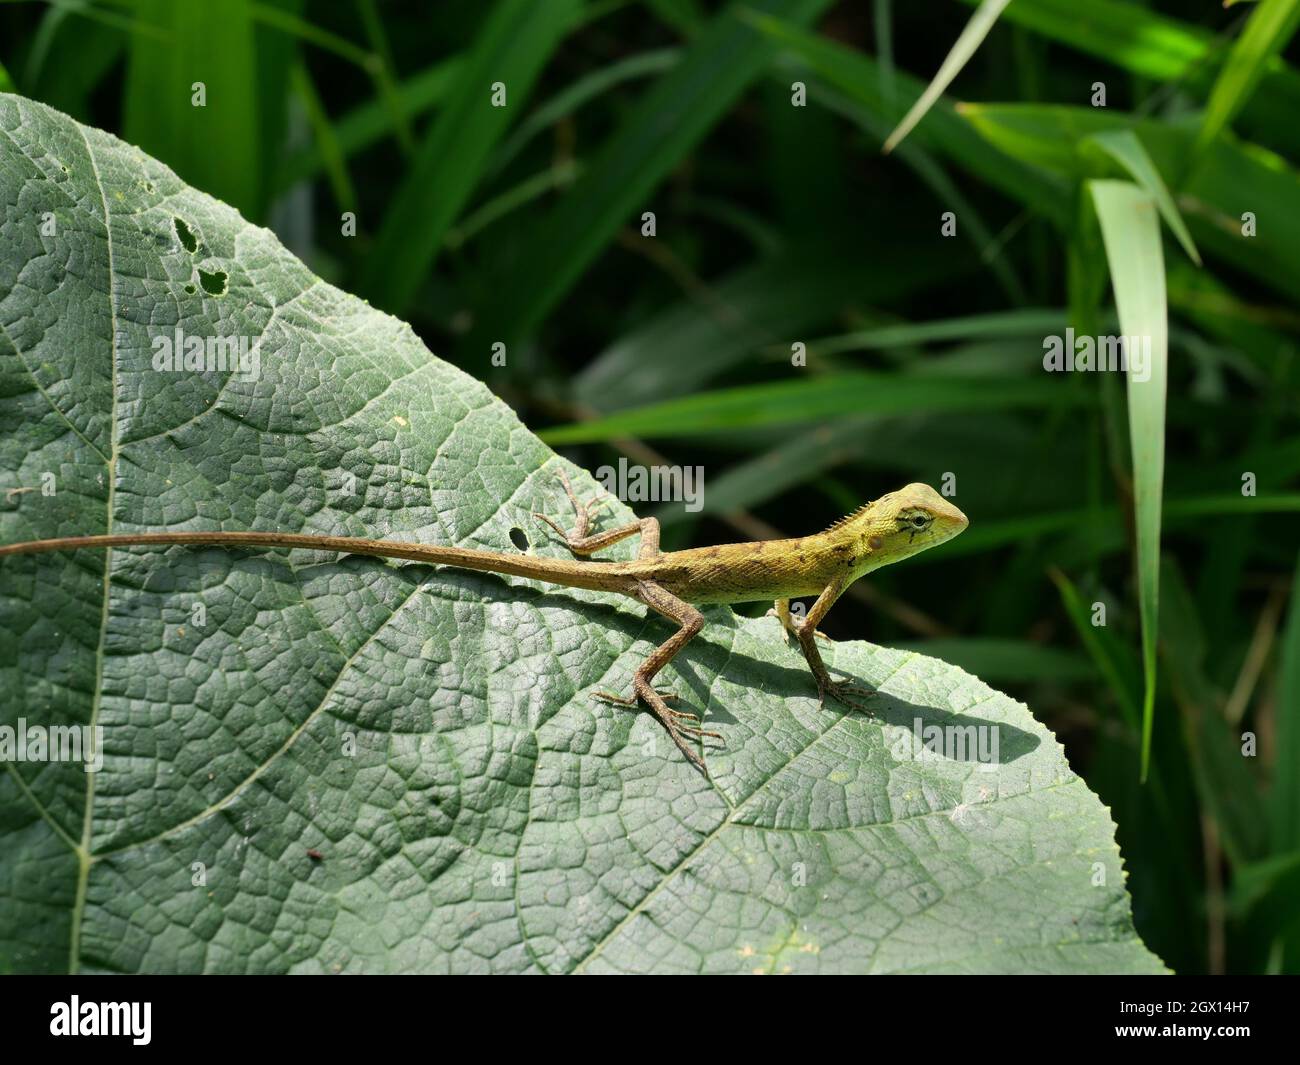 Closeup young Oriental garden or Eastern garden or Changeable lizard, Chameleon with natural green leaves in the background, Thailand Stock Photo